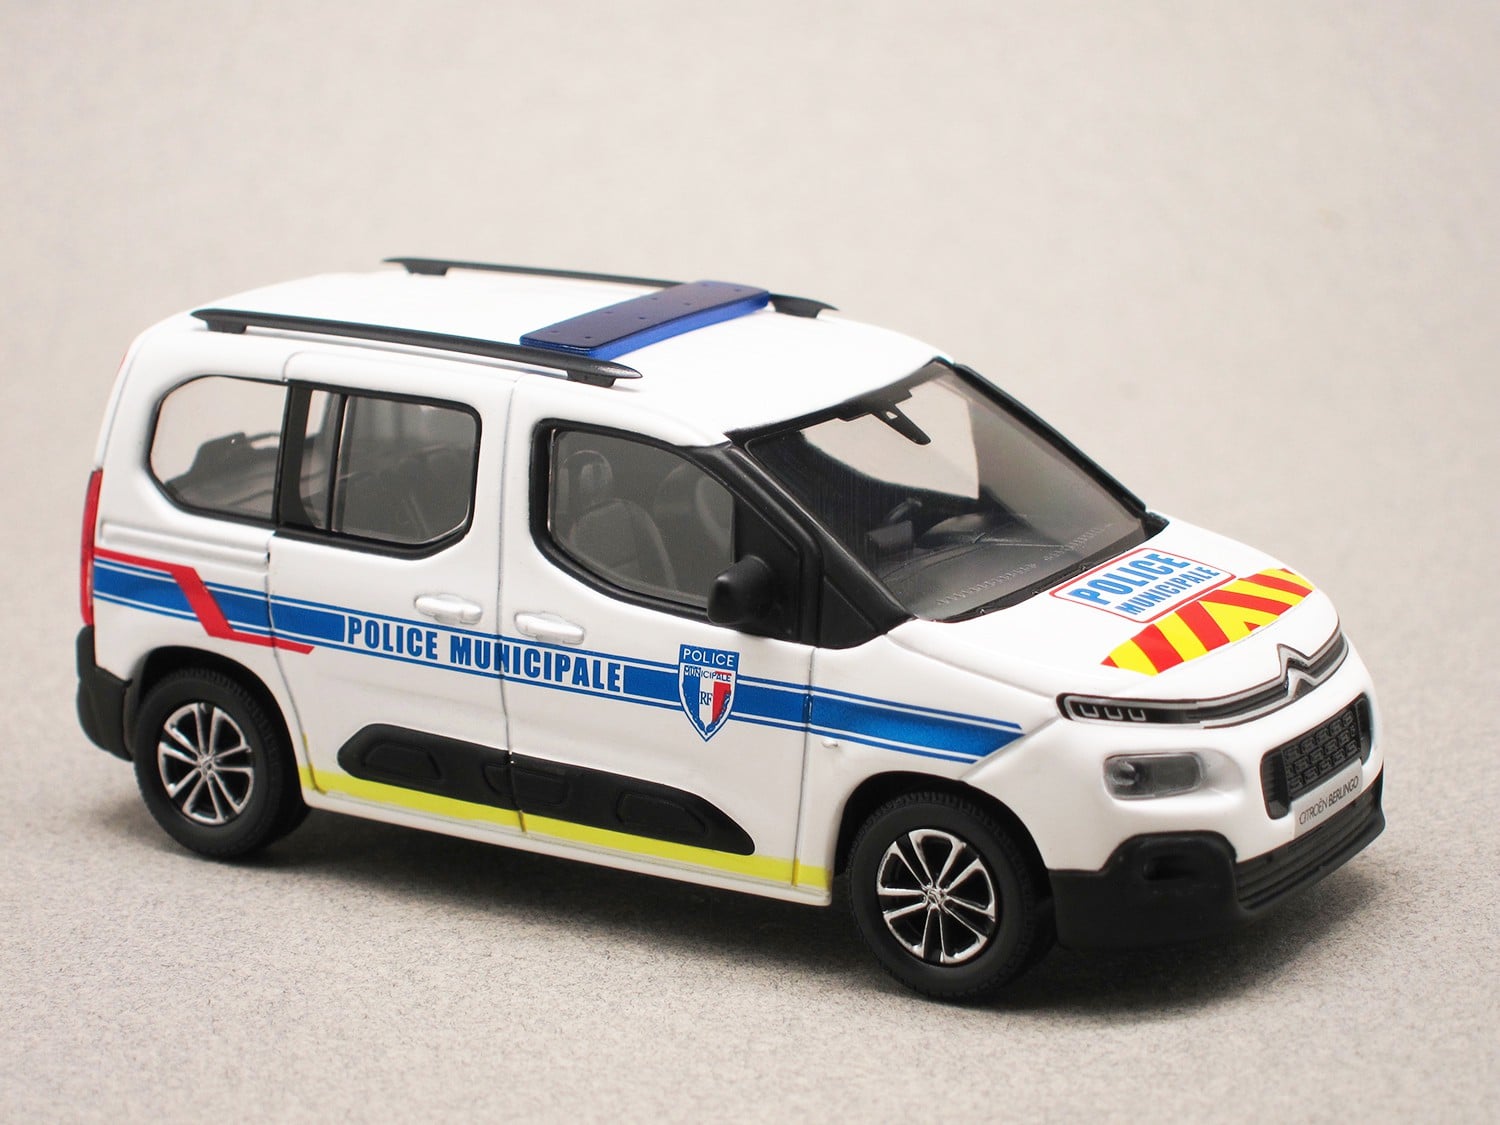 Citroën Berlingo III Police Municipale with strippings (Norev) 1:43